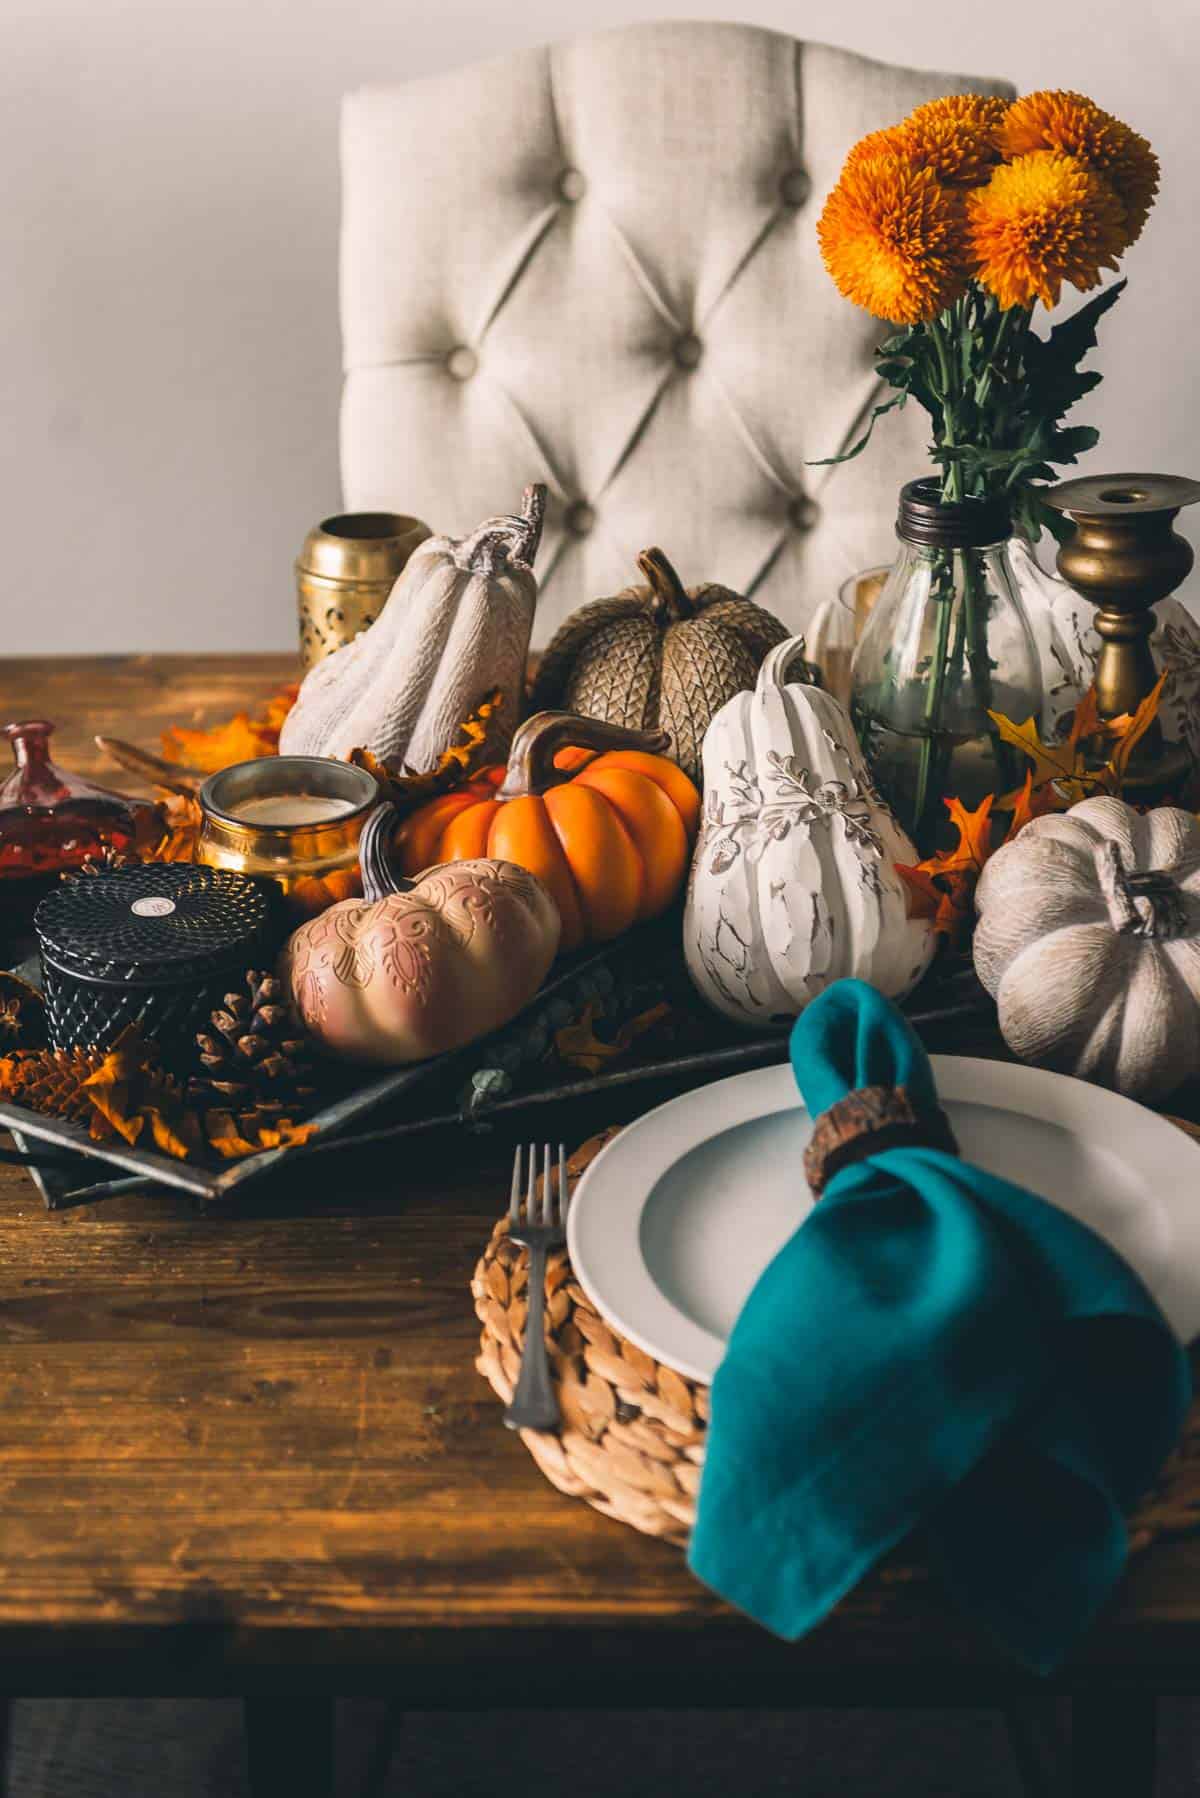 Thanksgiving table setting with pumpkins and flowers.